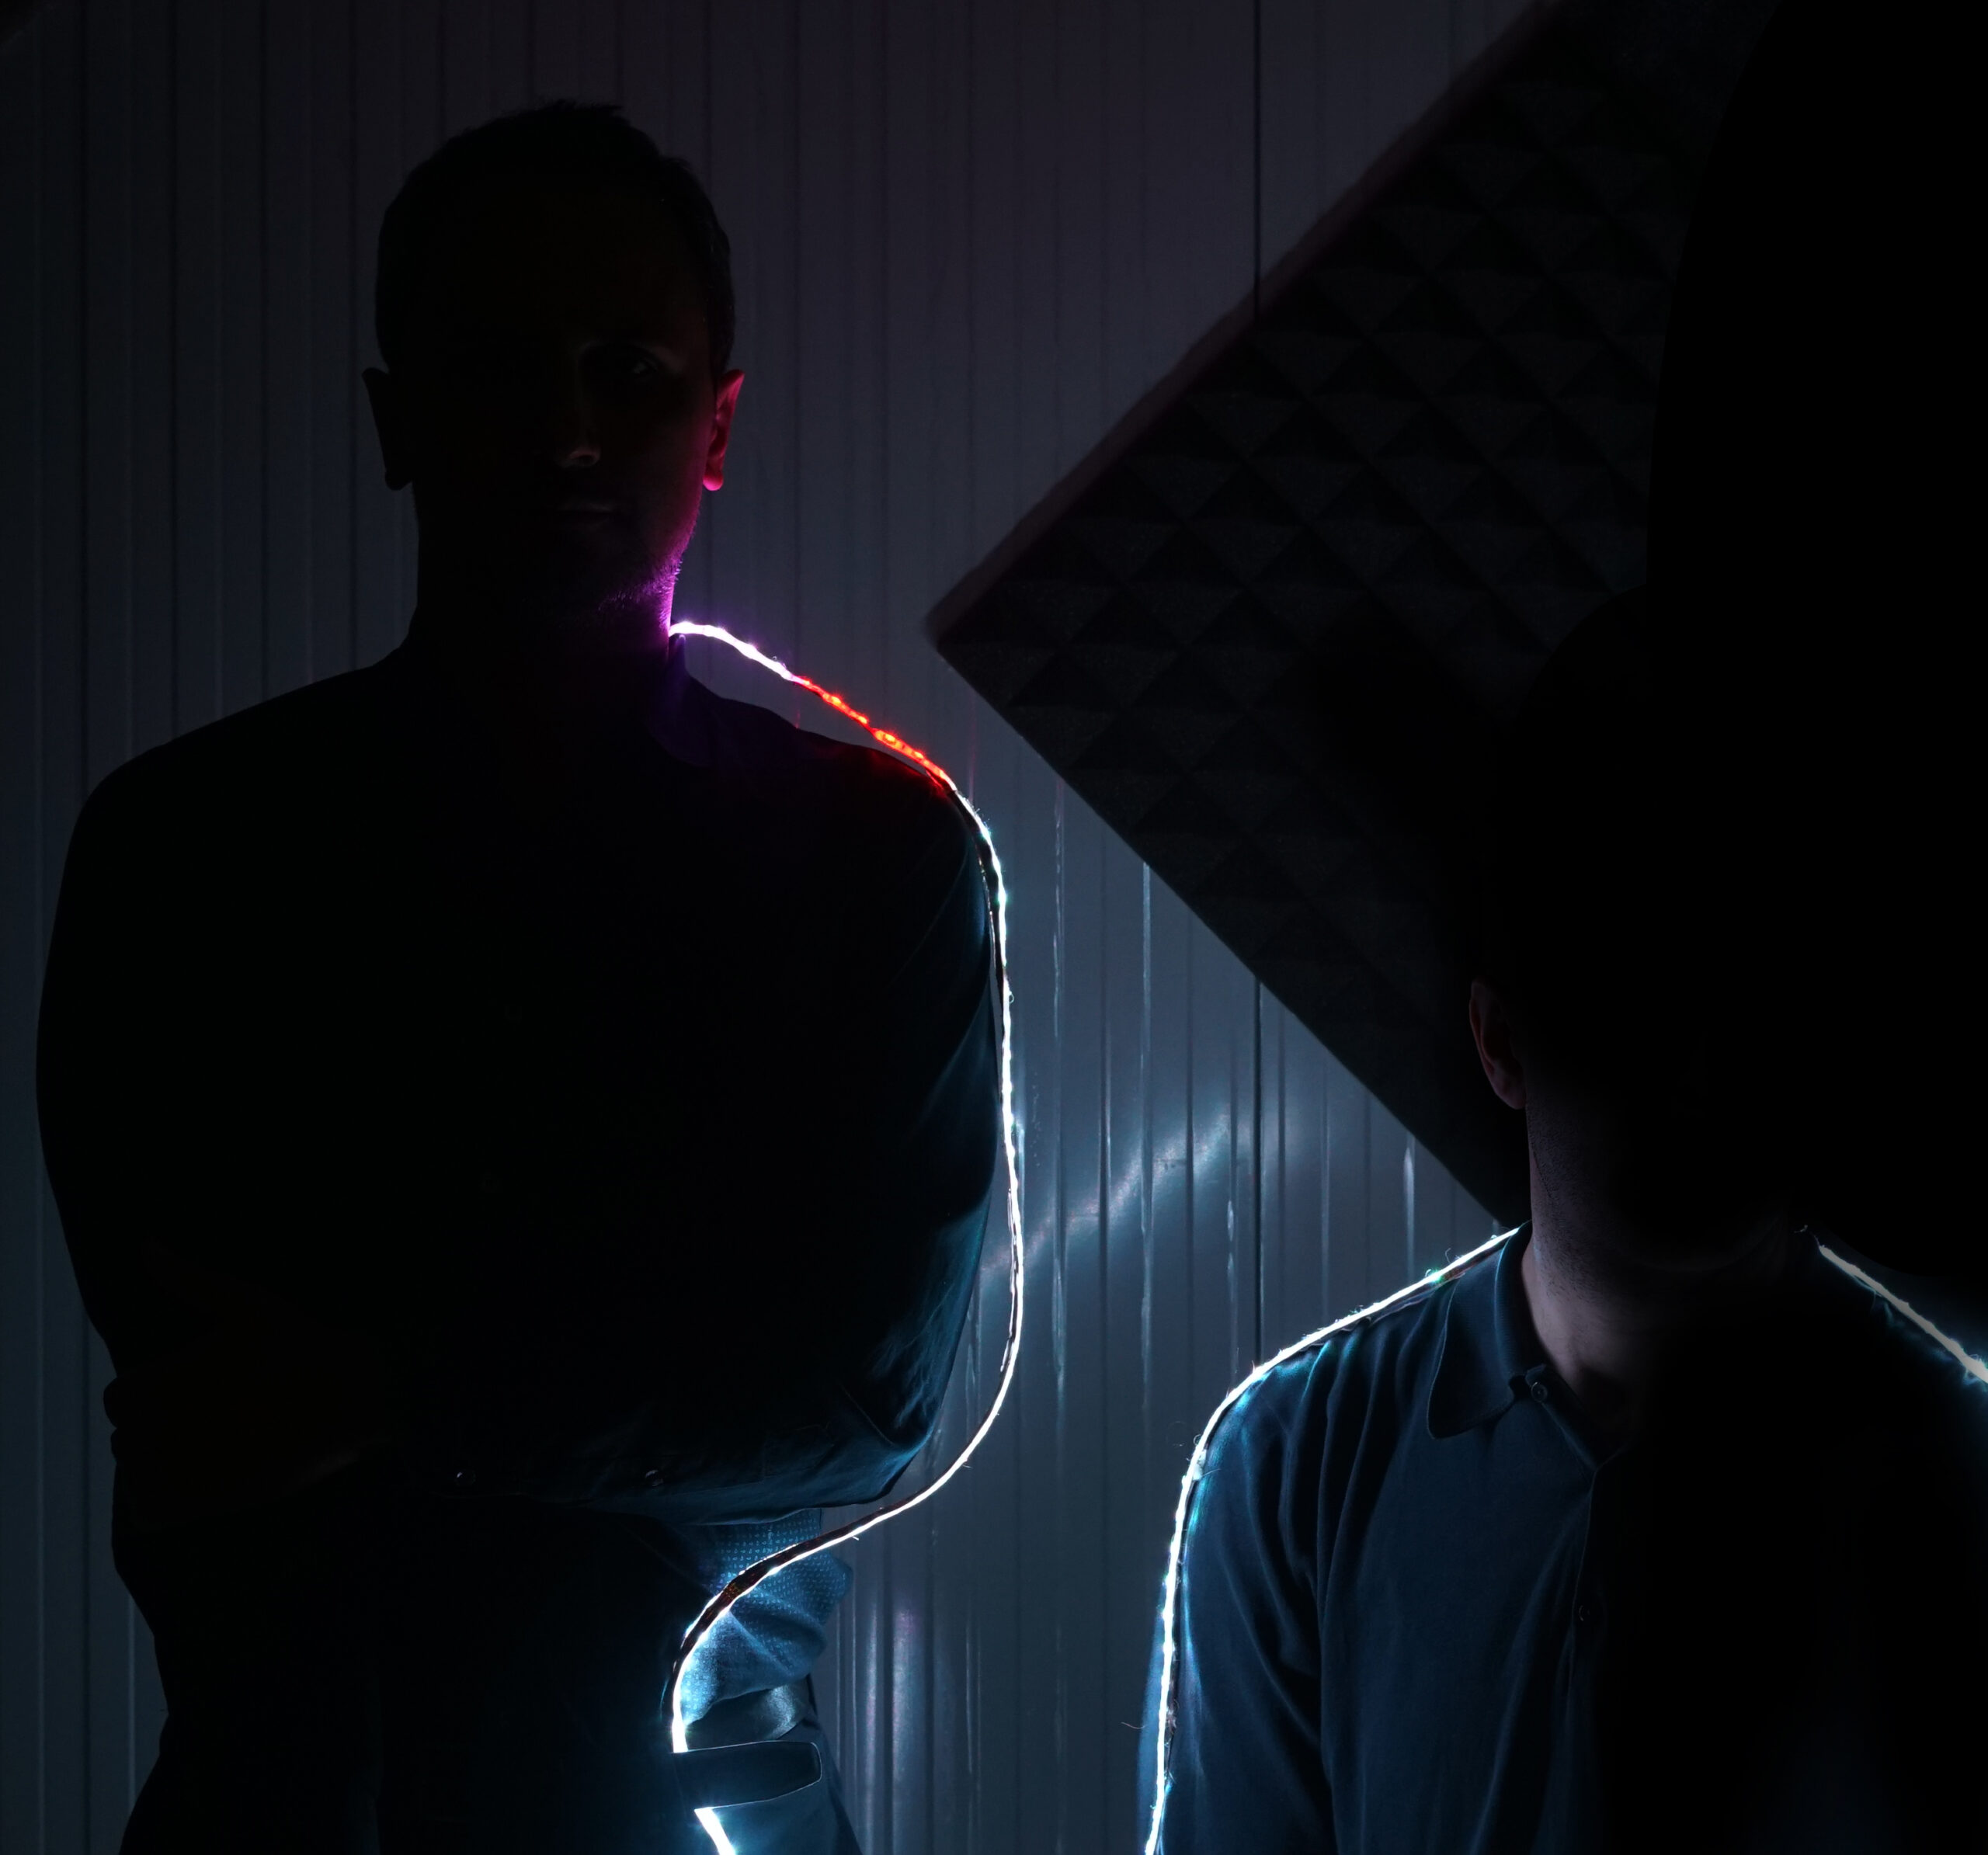 “Sense of Natural Confusion” is the new album by electro-synthwave duo Kabuki Dream